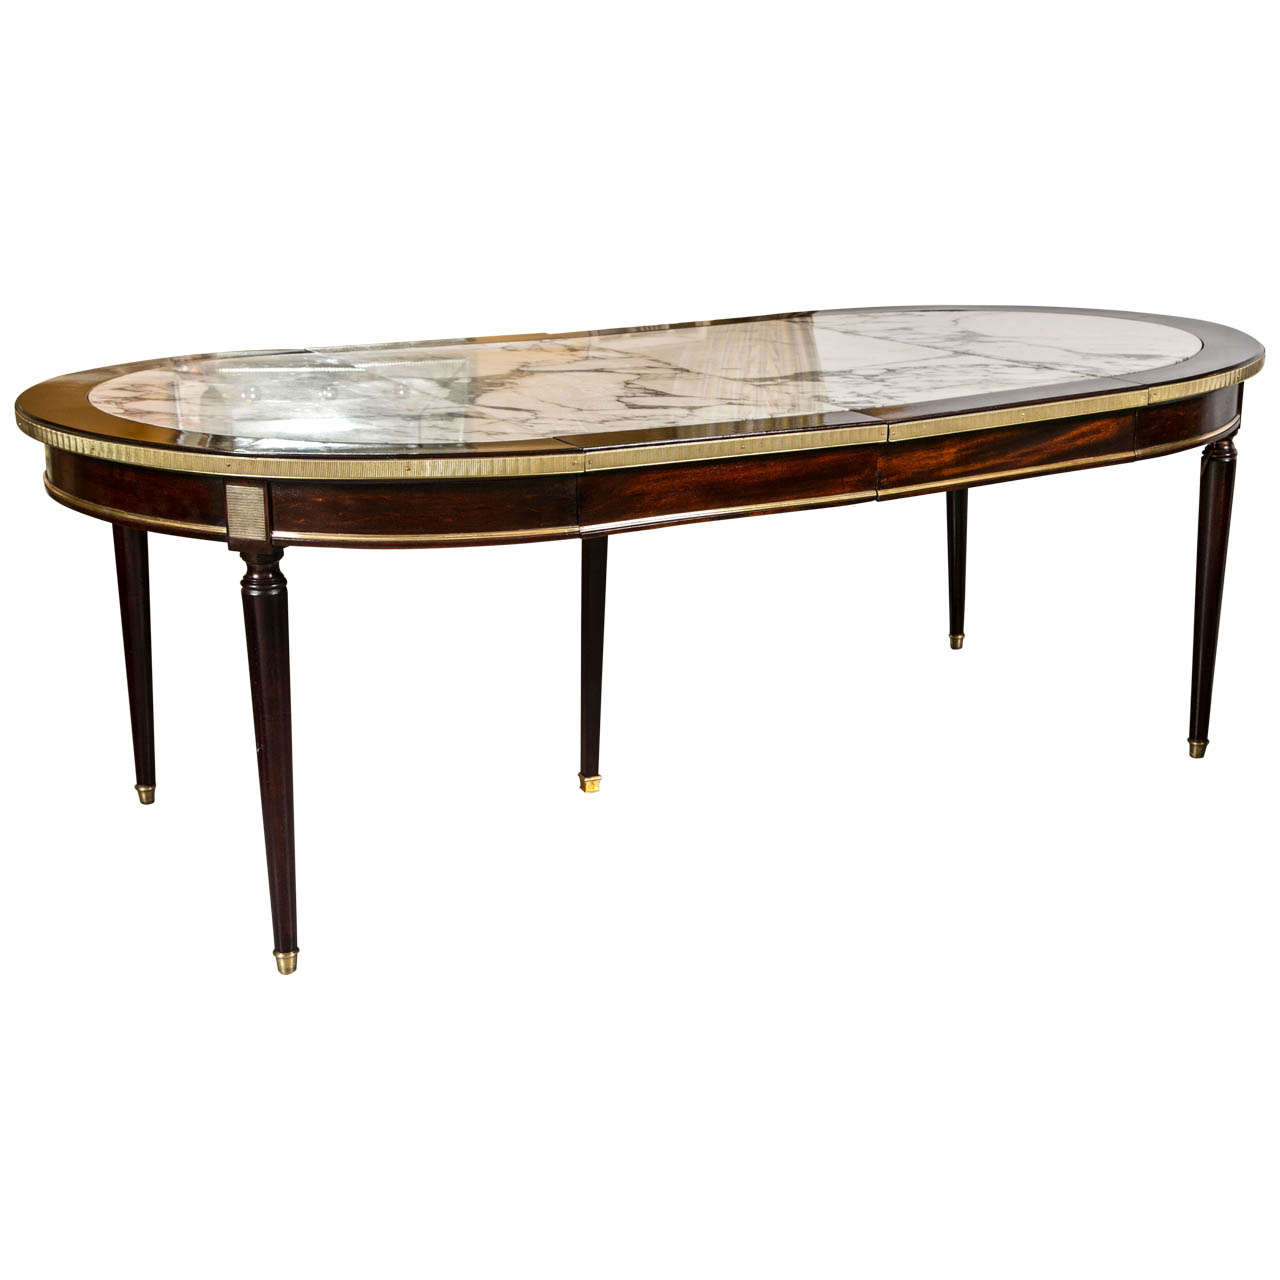 A Two Leaf Marble Top Dining Table by Maison Jansen